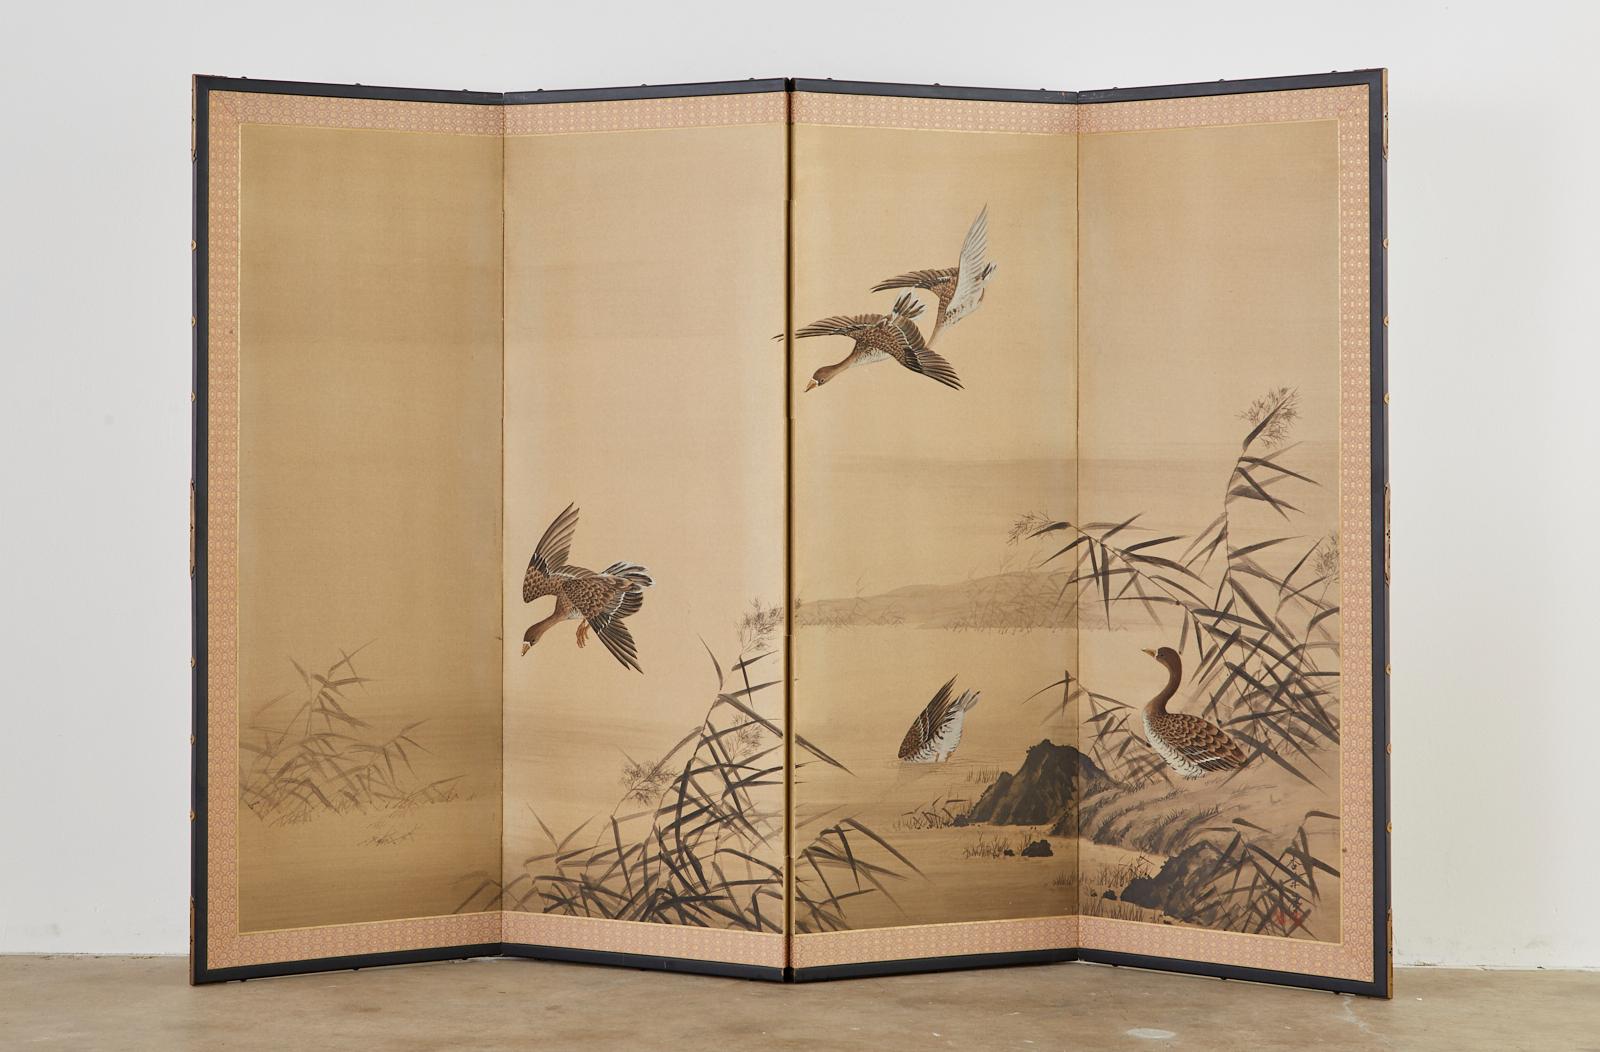 Fine Japanese four-panel Showa period screen depicting five wild ducks among reeds at a serene water landscape. Beautifully detained ink and color painting on gilt paper. Made in the Nihonga School style. Signed by artist with a seal Kyoka-hitsu on